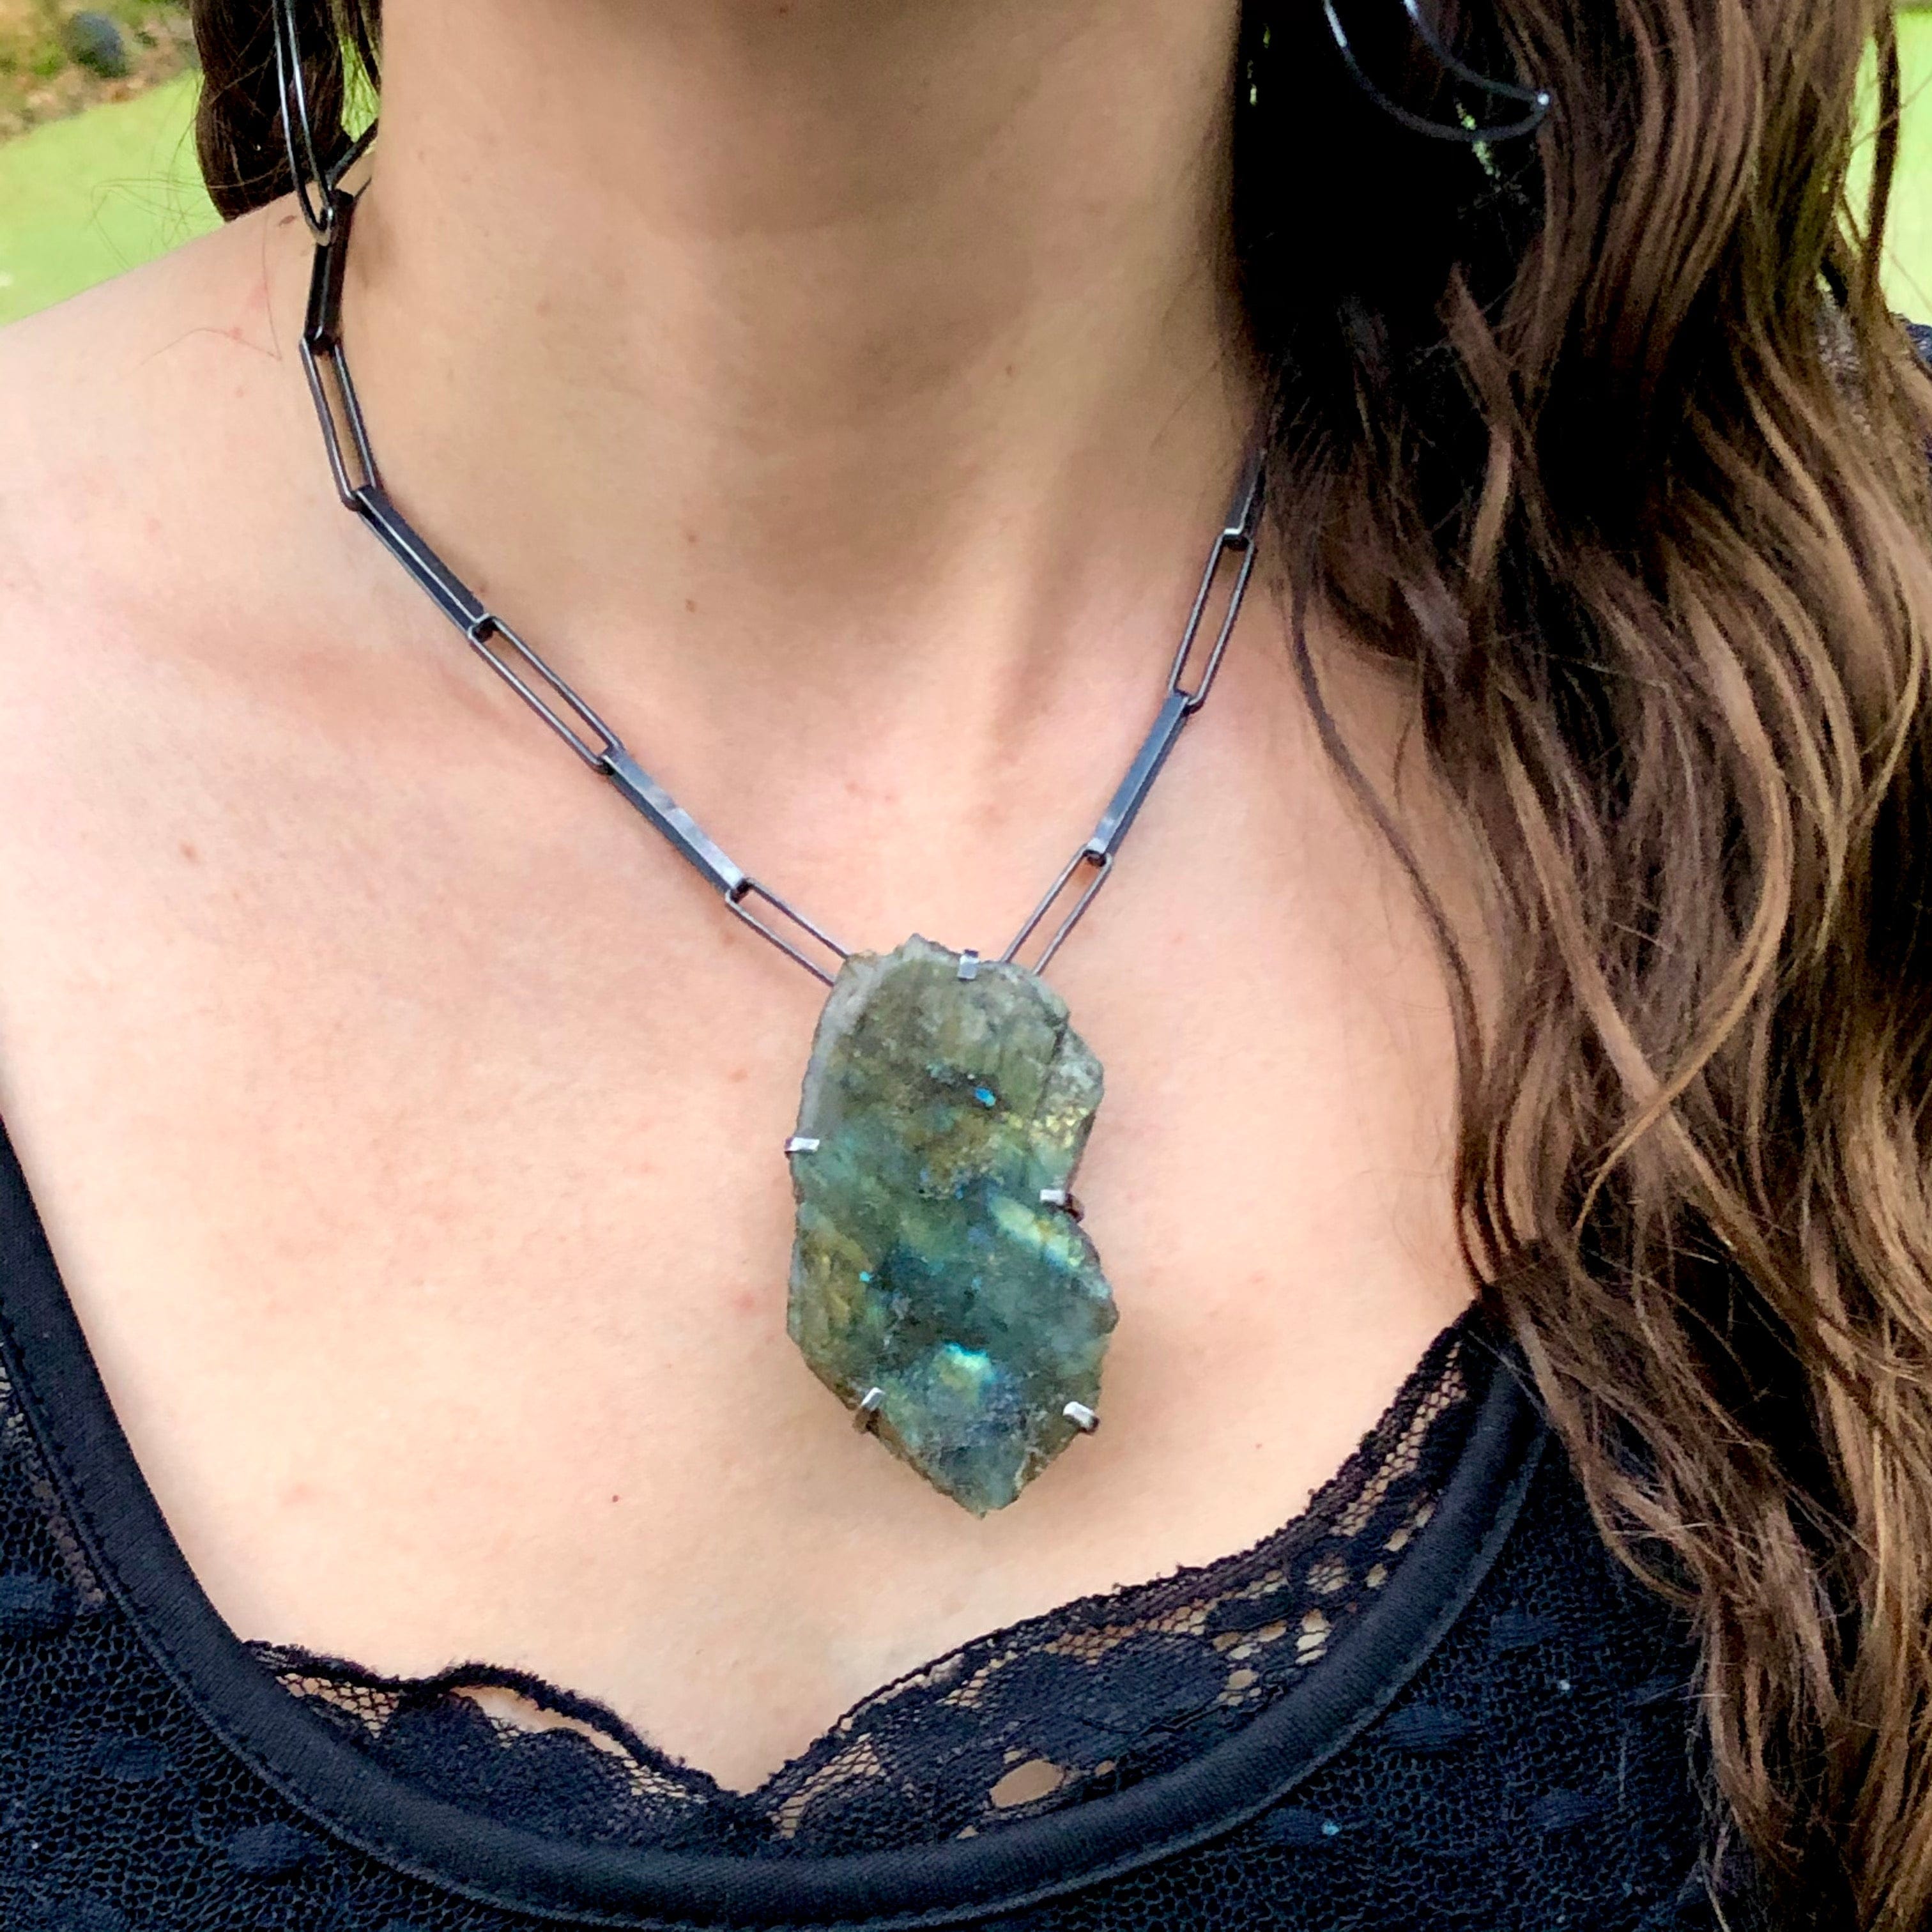 Labradorite Magical Talisman Necklace. Handmade by Alex Lozier Jewelry. Season of the Witch collection.